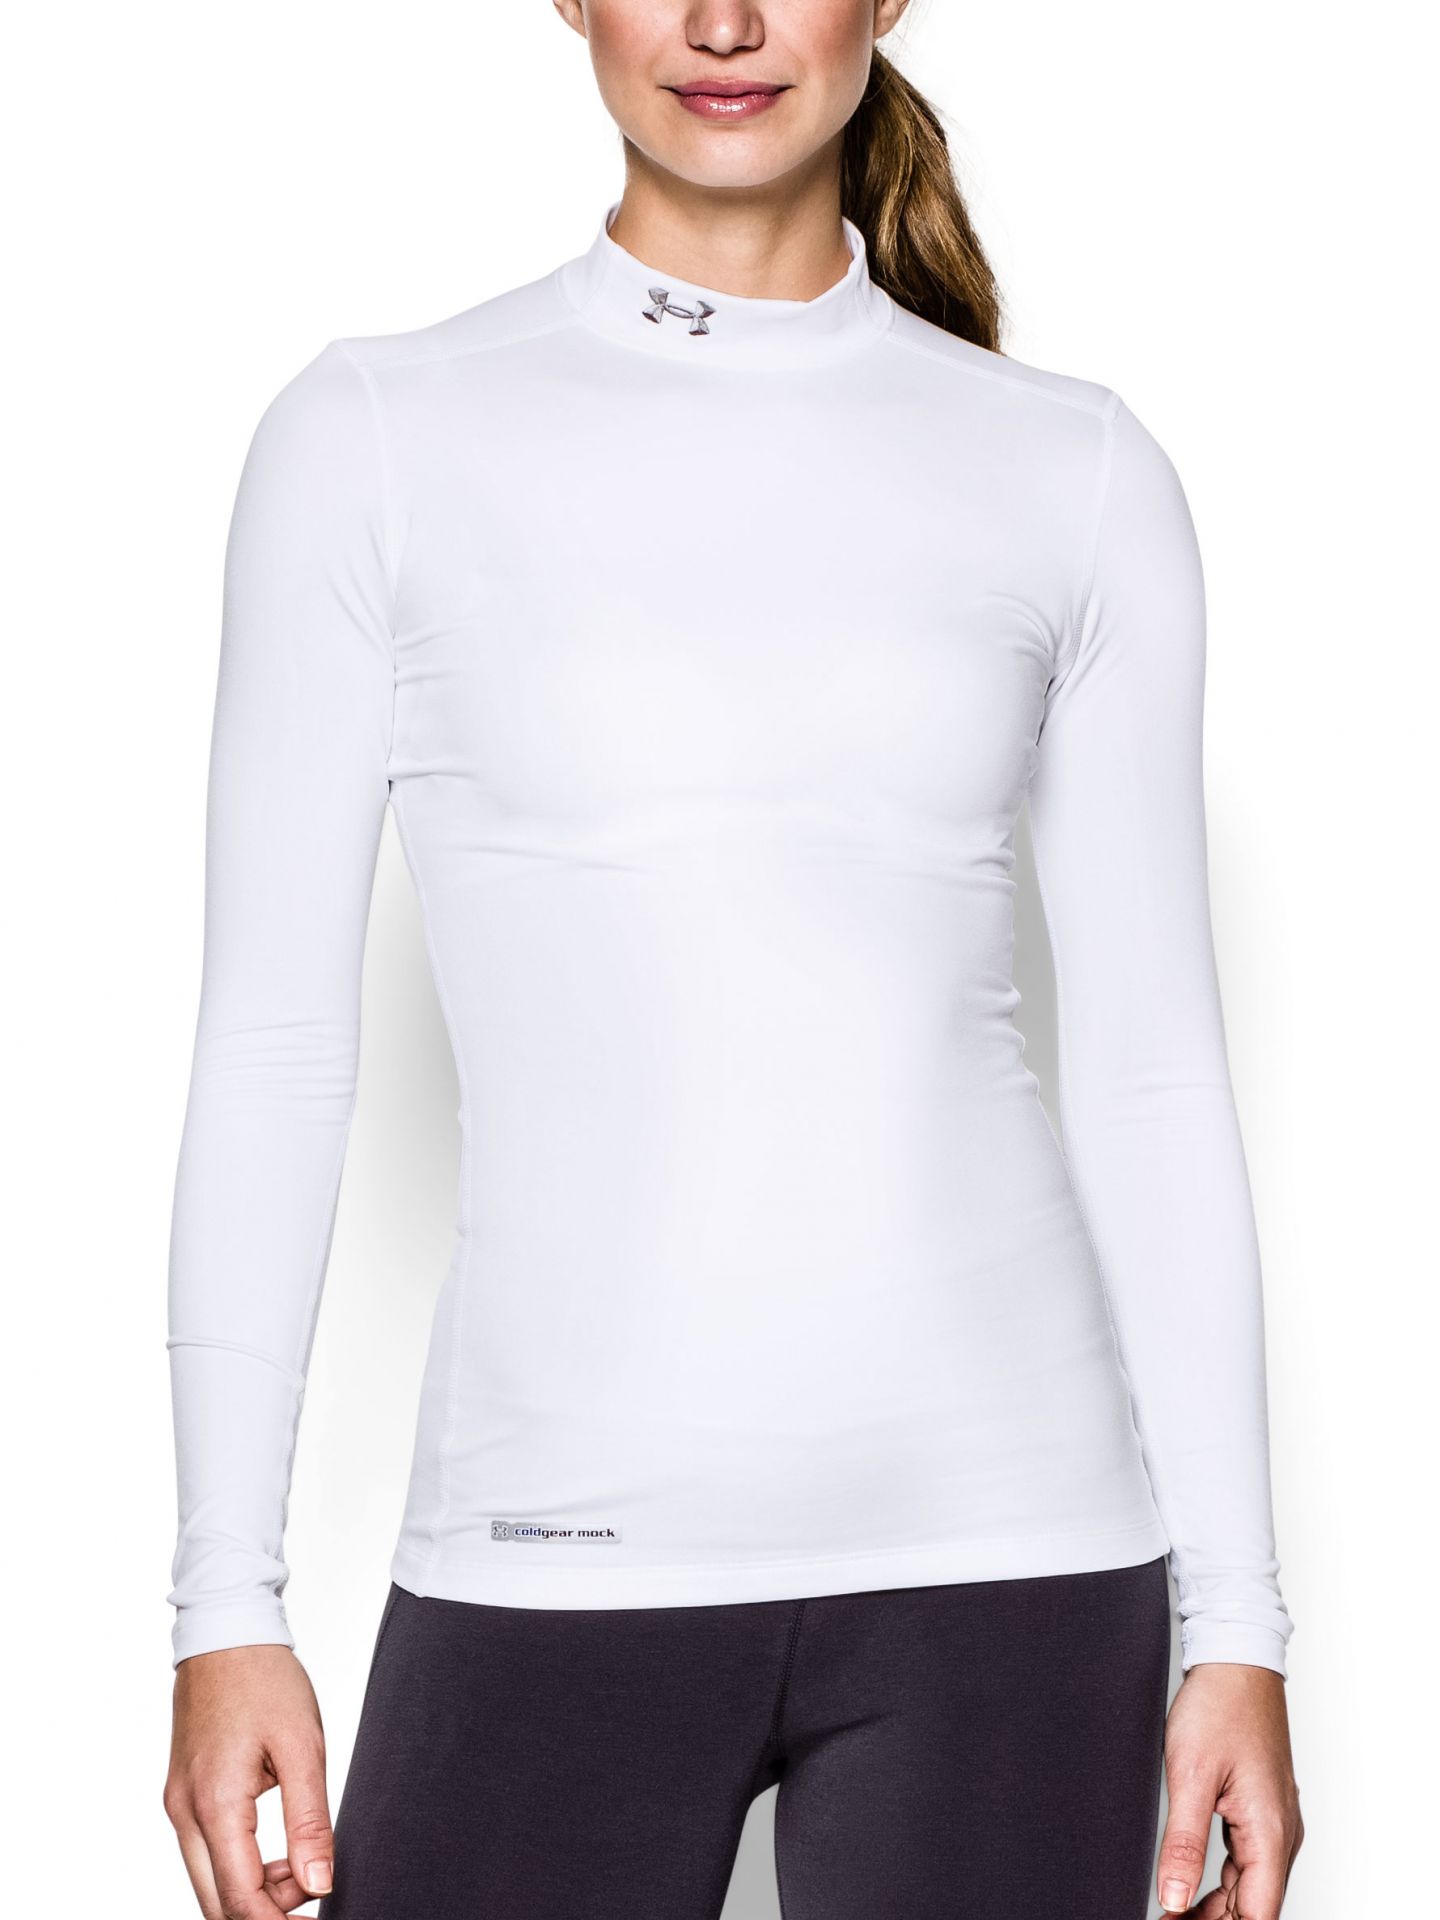 Under Armour Women's ColdGear Authentic Fitted Mock 1215968 | eBay